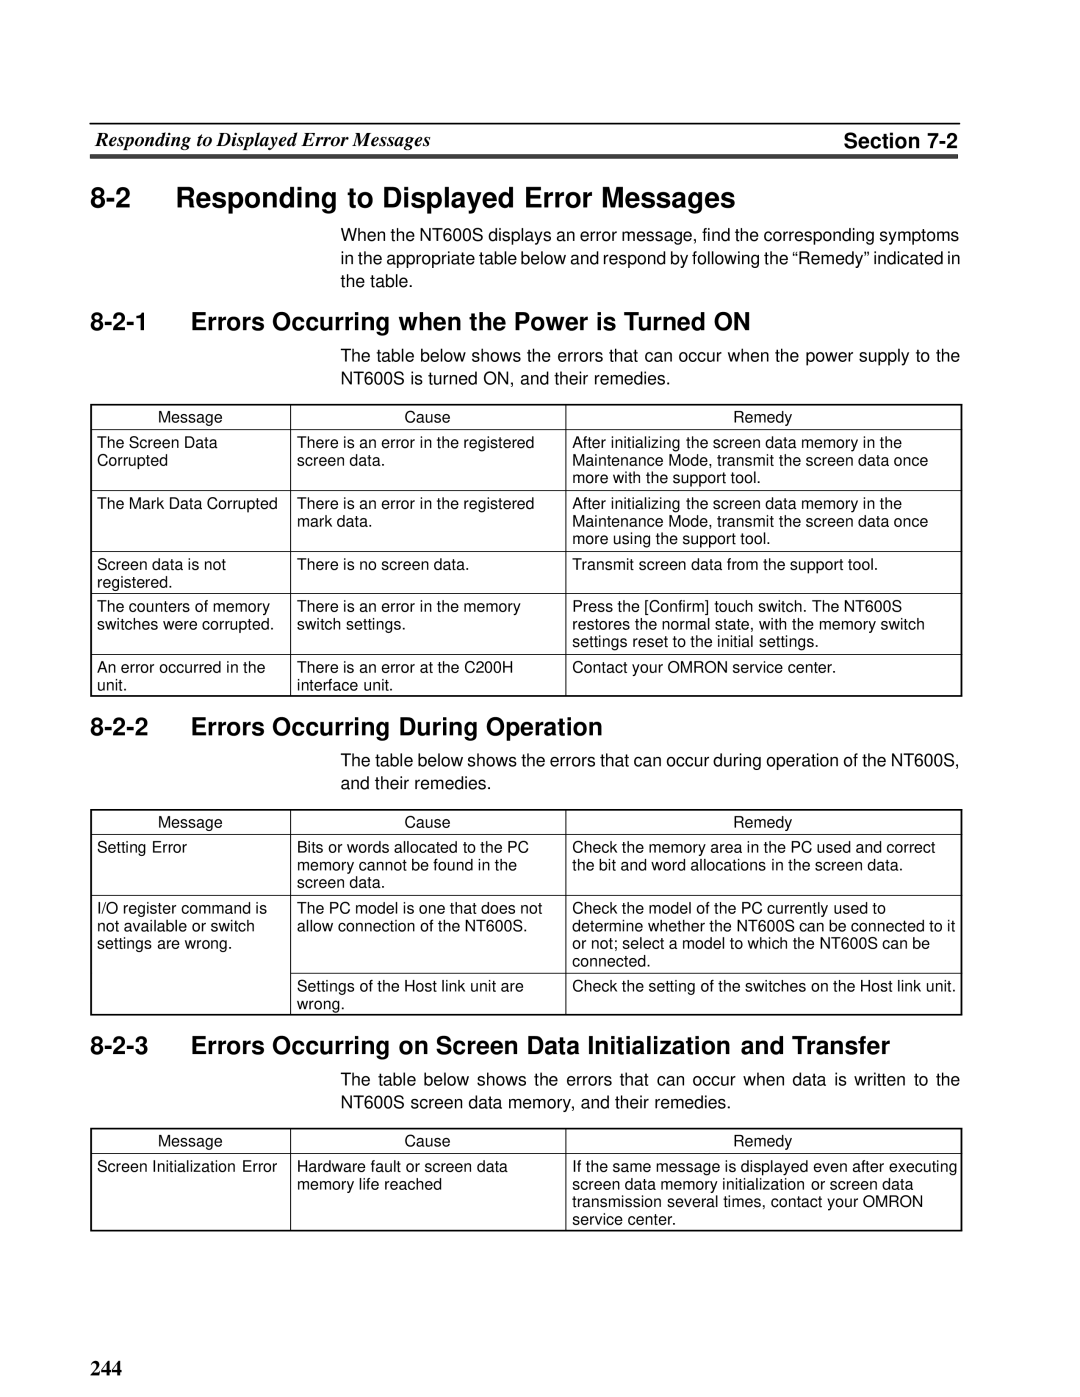 Omron V022-E3-1 Responding to Displayed Error Messages, Errors Occurring when the Power is Turned ON, 8-2-1, 8-2-2, 8-2-3 